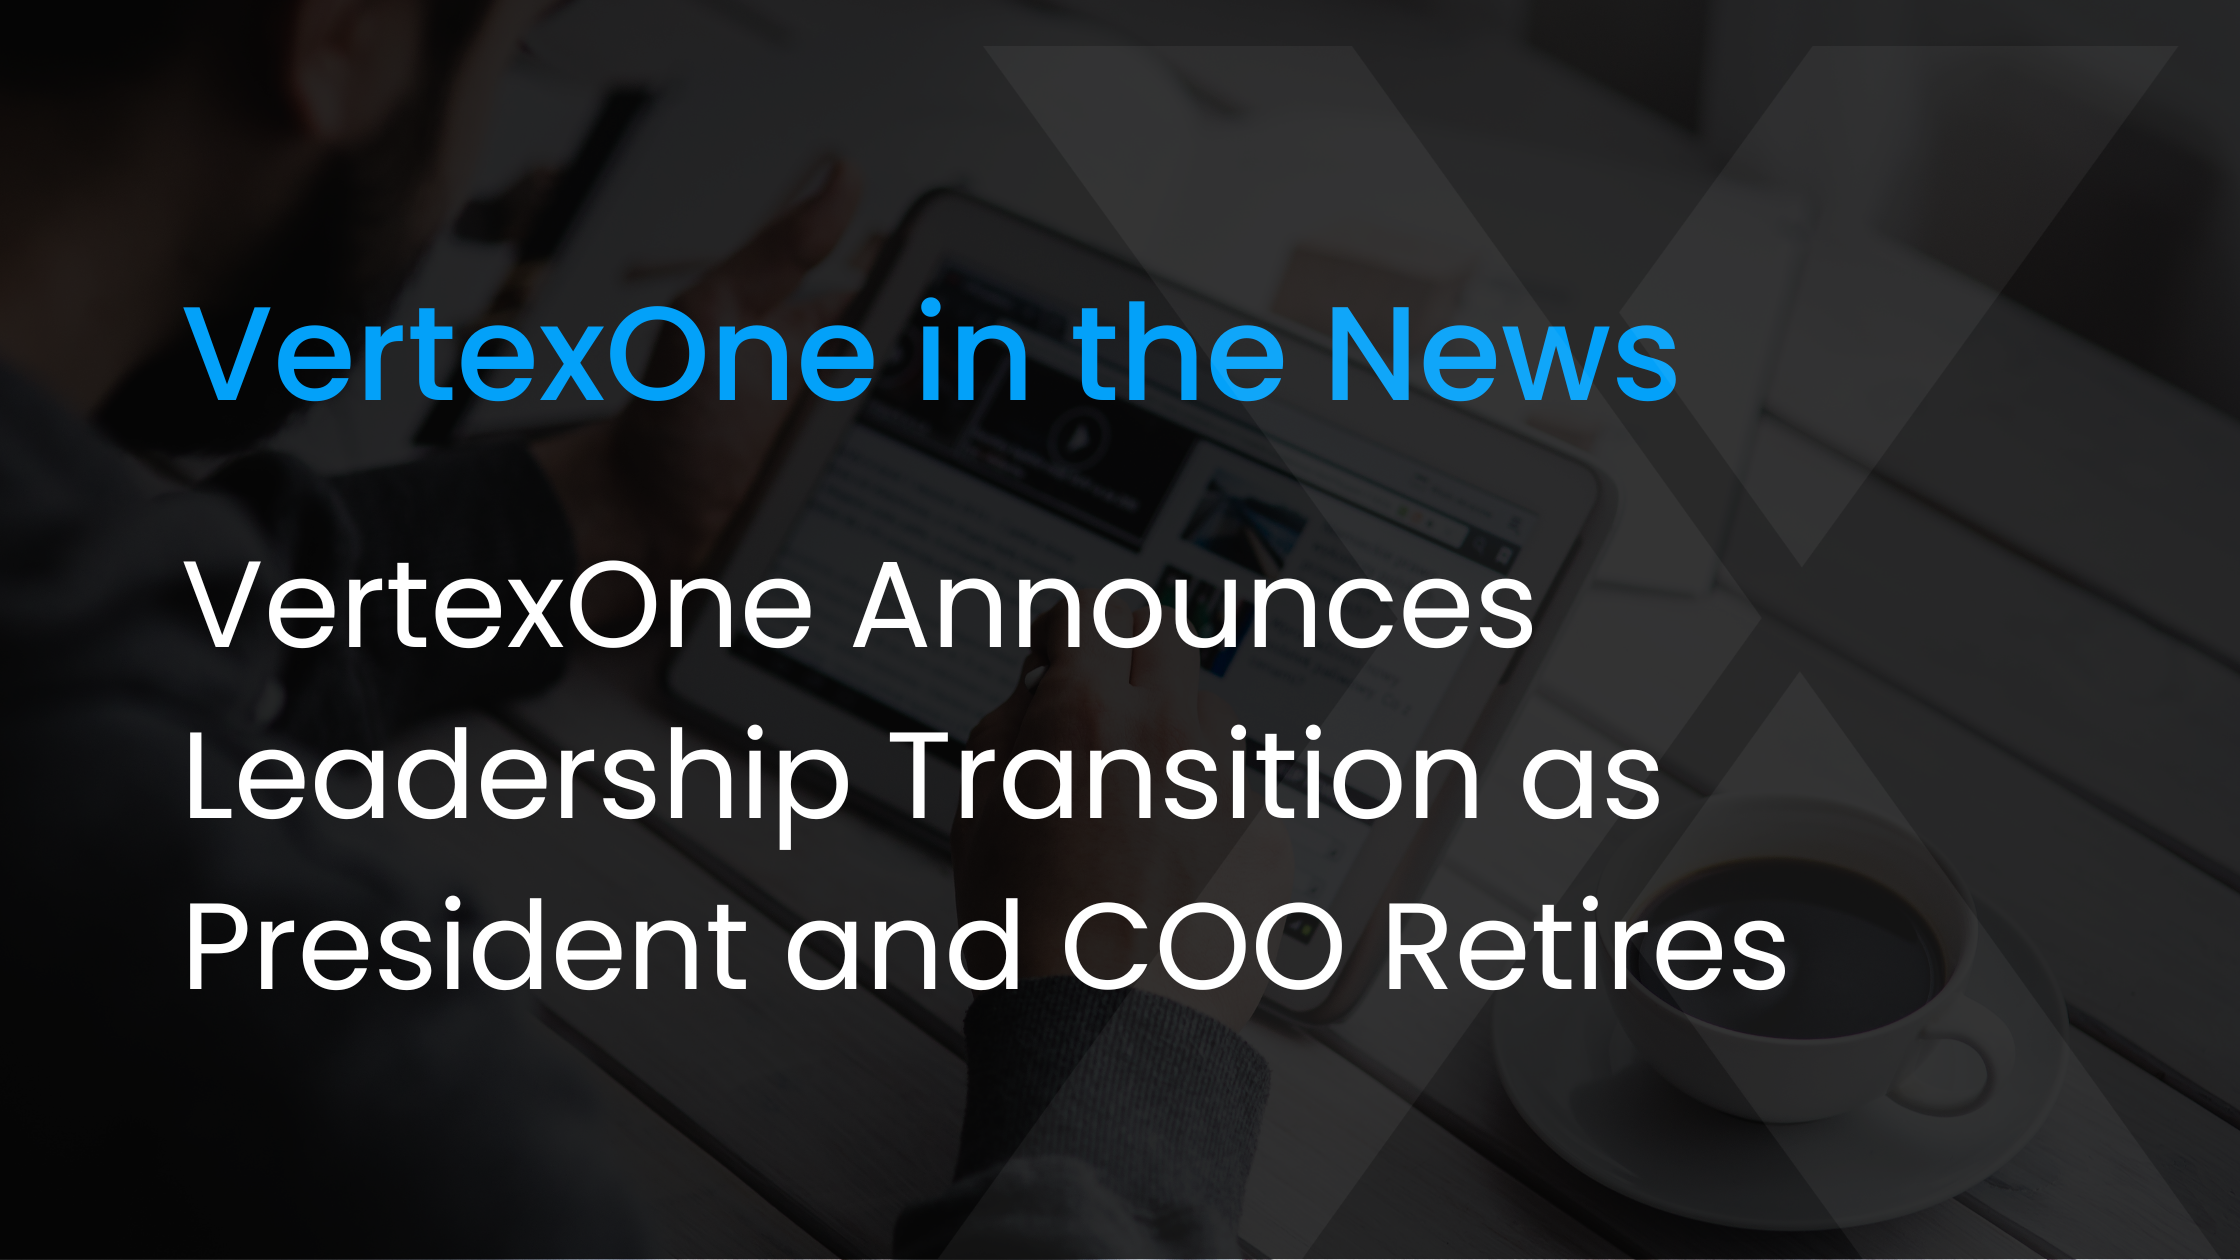 VertexOne Announces Leadership Transition as President and COO Retires